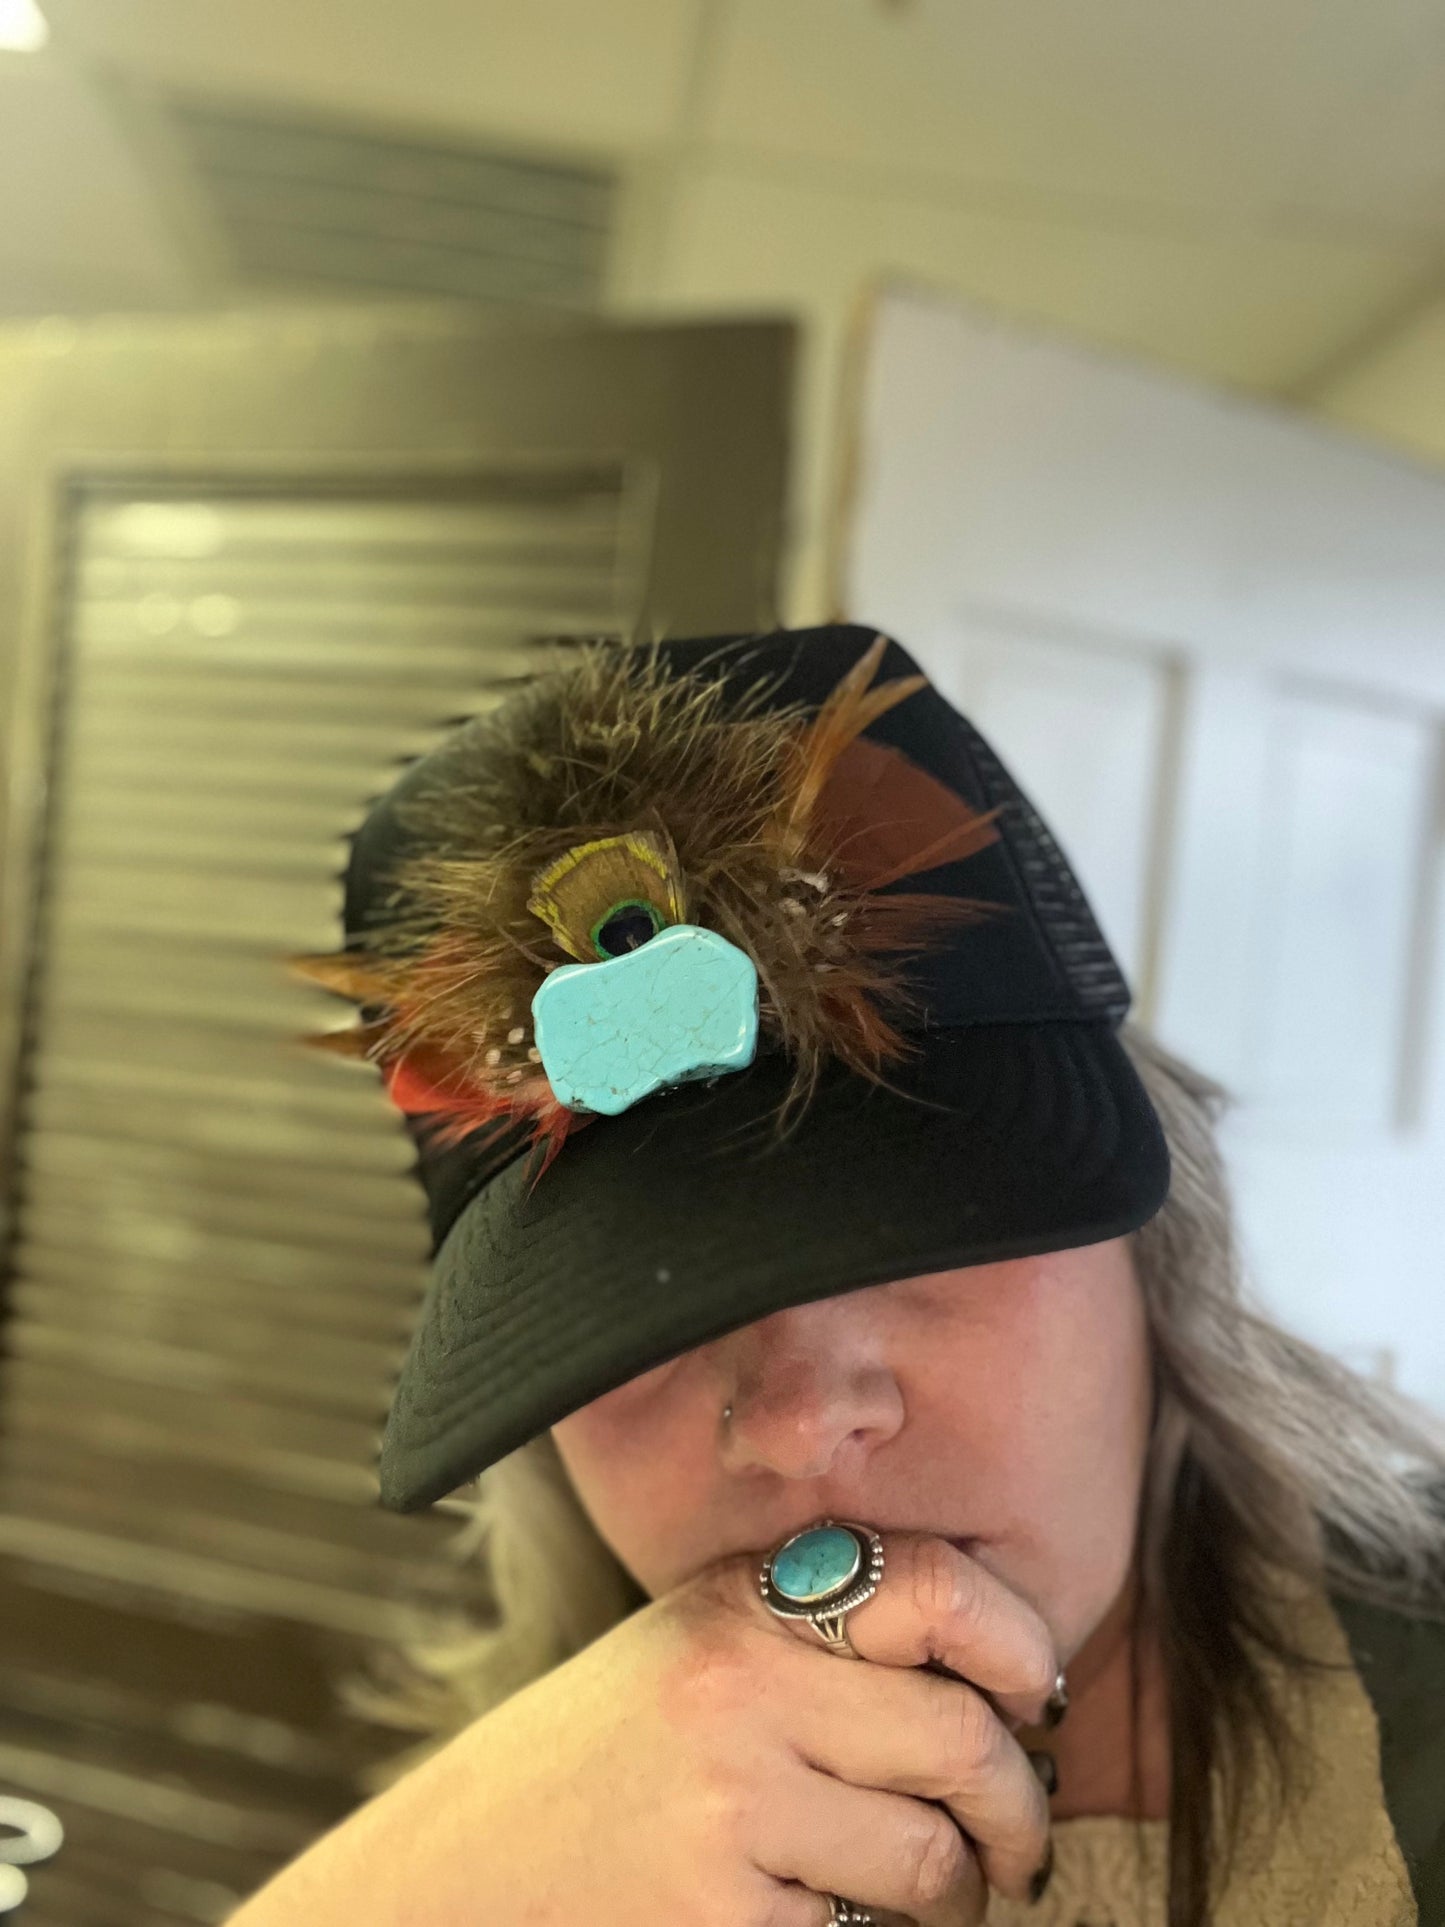 Black Trucker Hat with Turquoise Stone